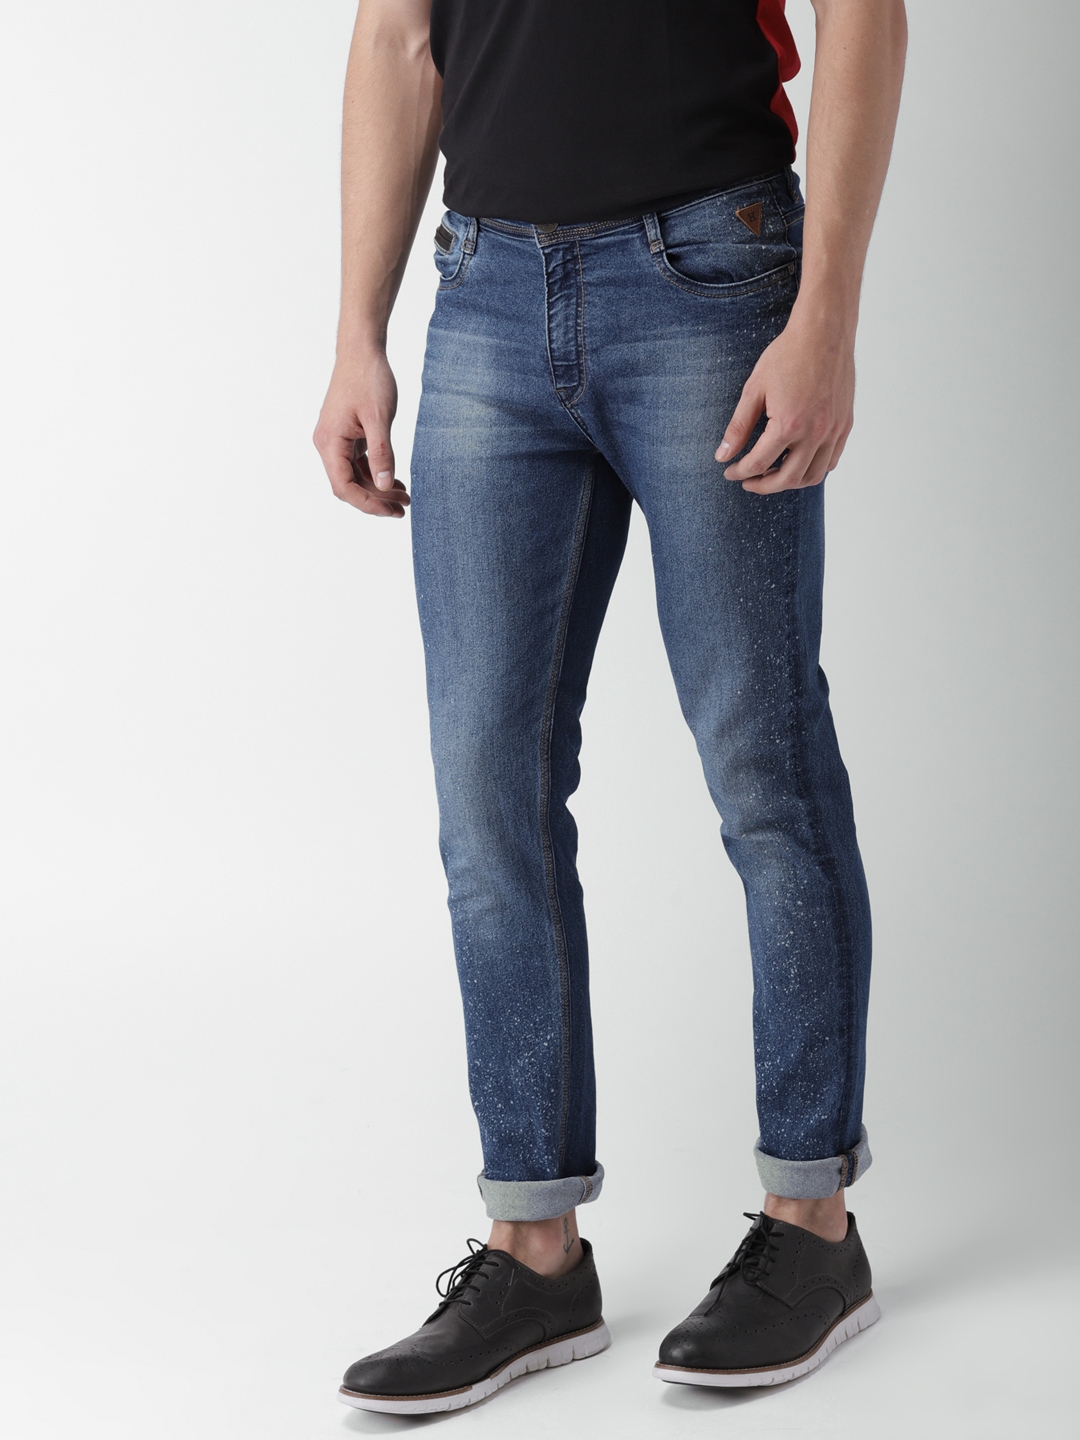 For 659/-(70% Off) Minimum 70% Off On Harvard Jeans at Myntra